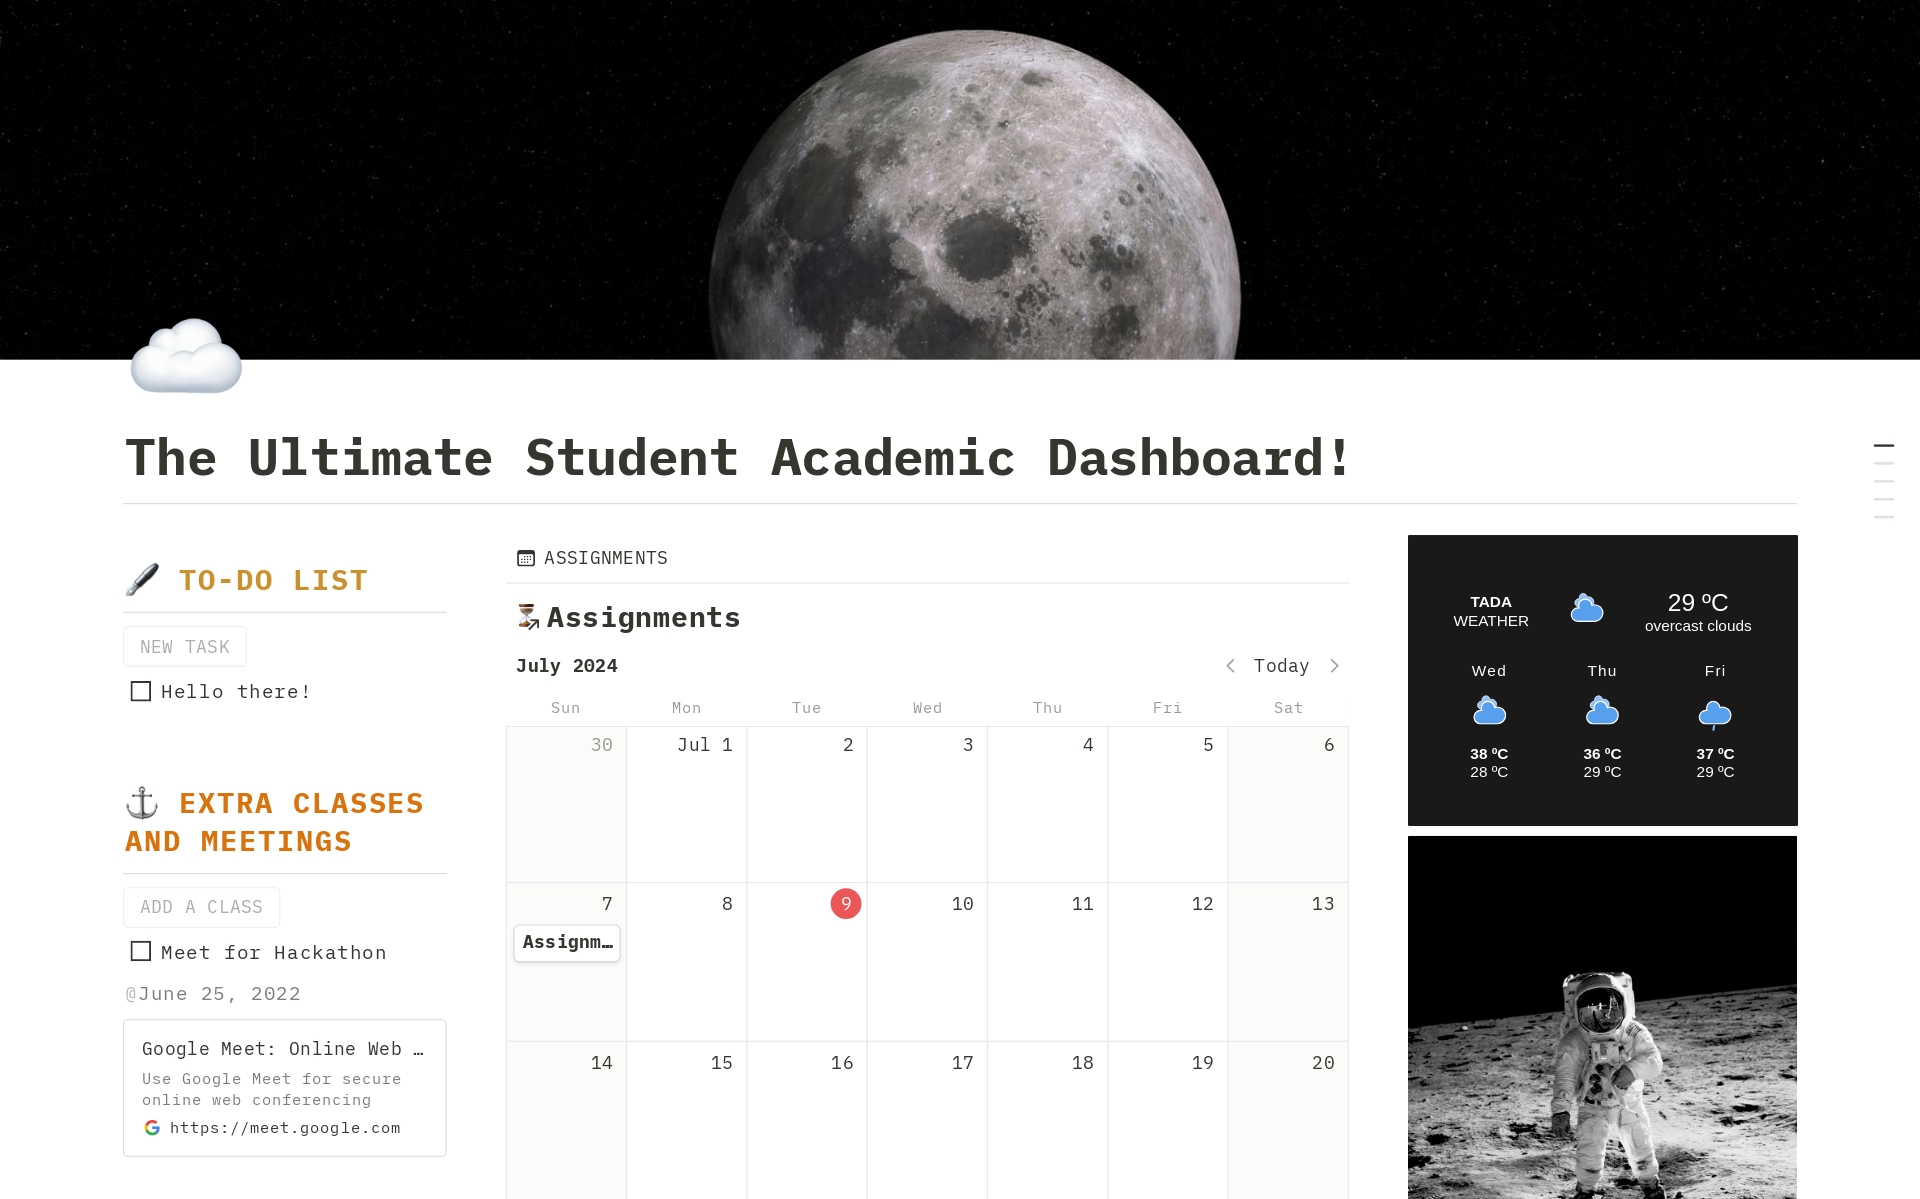 Supercharge Your Academic Life!
Unlock your potential with this Space-Themed Academic Tracker Notion Template. Streamline your student life with organization, time management, and performance tracking in one epic system. Never miss a deadline, forget an assignment, or lose notes.